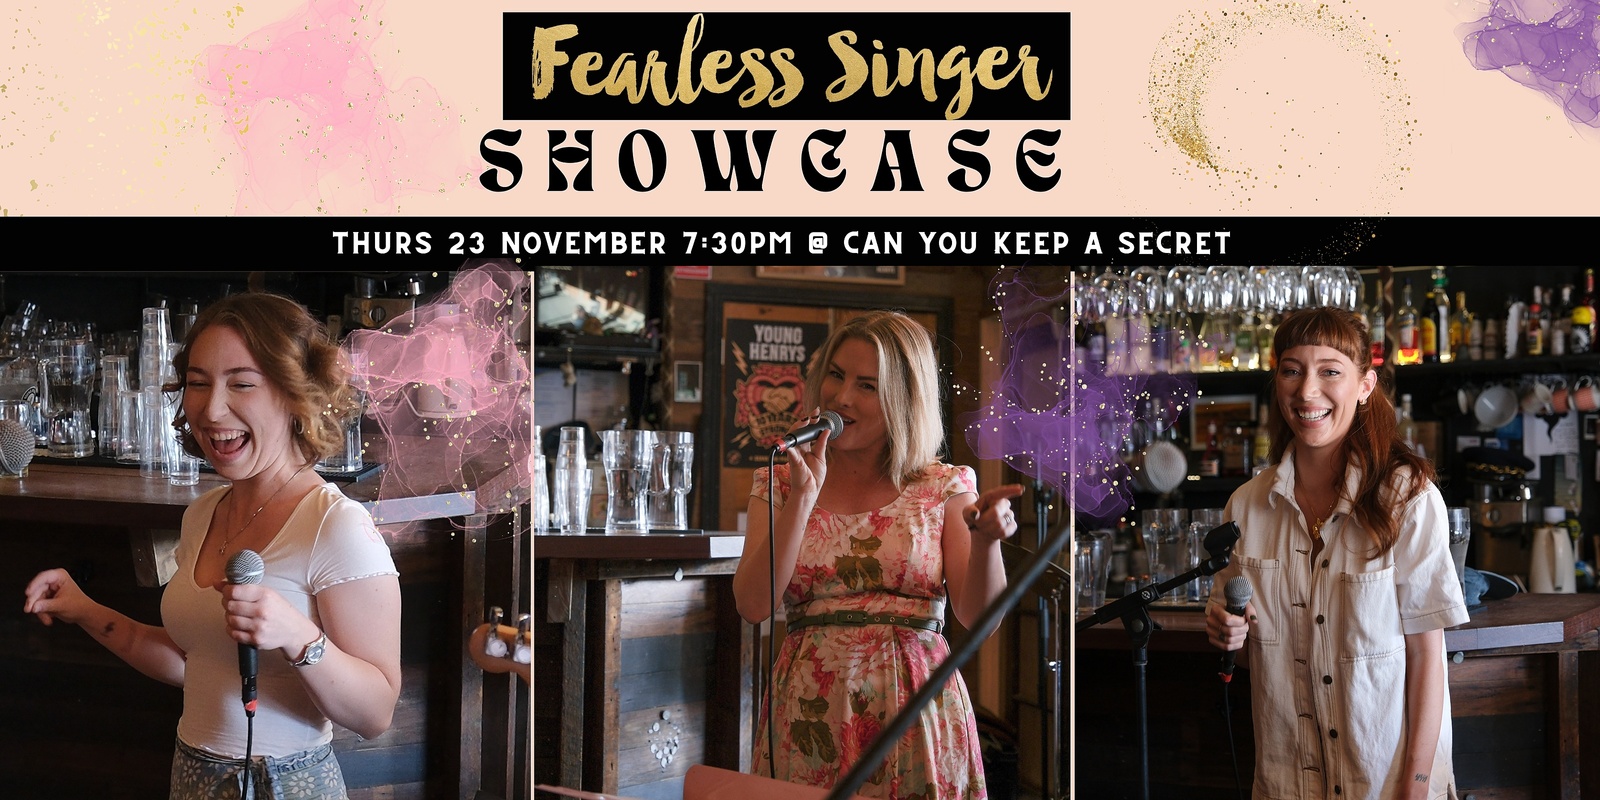 Banner image for Fearless Singer Showcase @ CYKAS